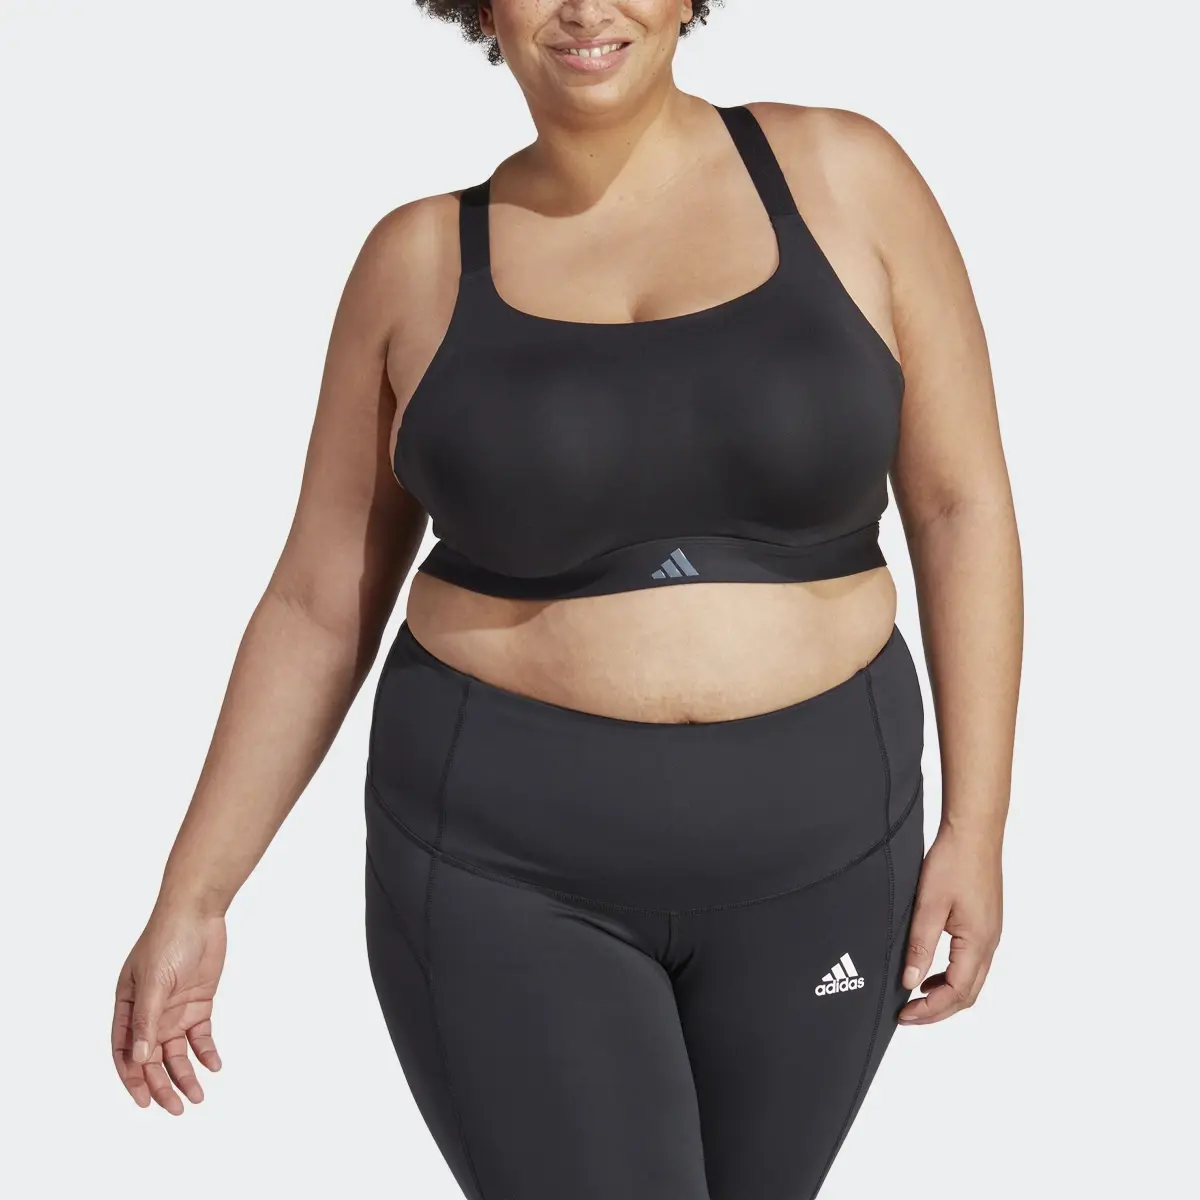 Adidas Tailored Impact Luxe Training High-Support Bra (Plus Size). 1